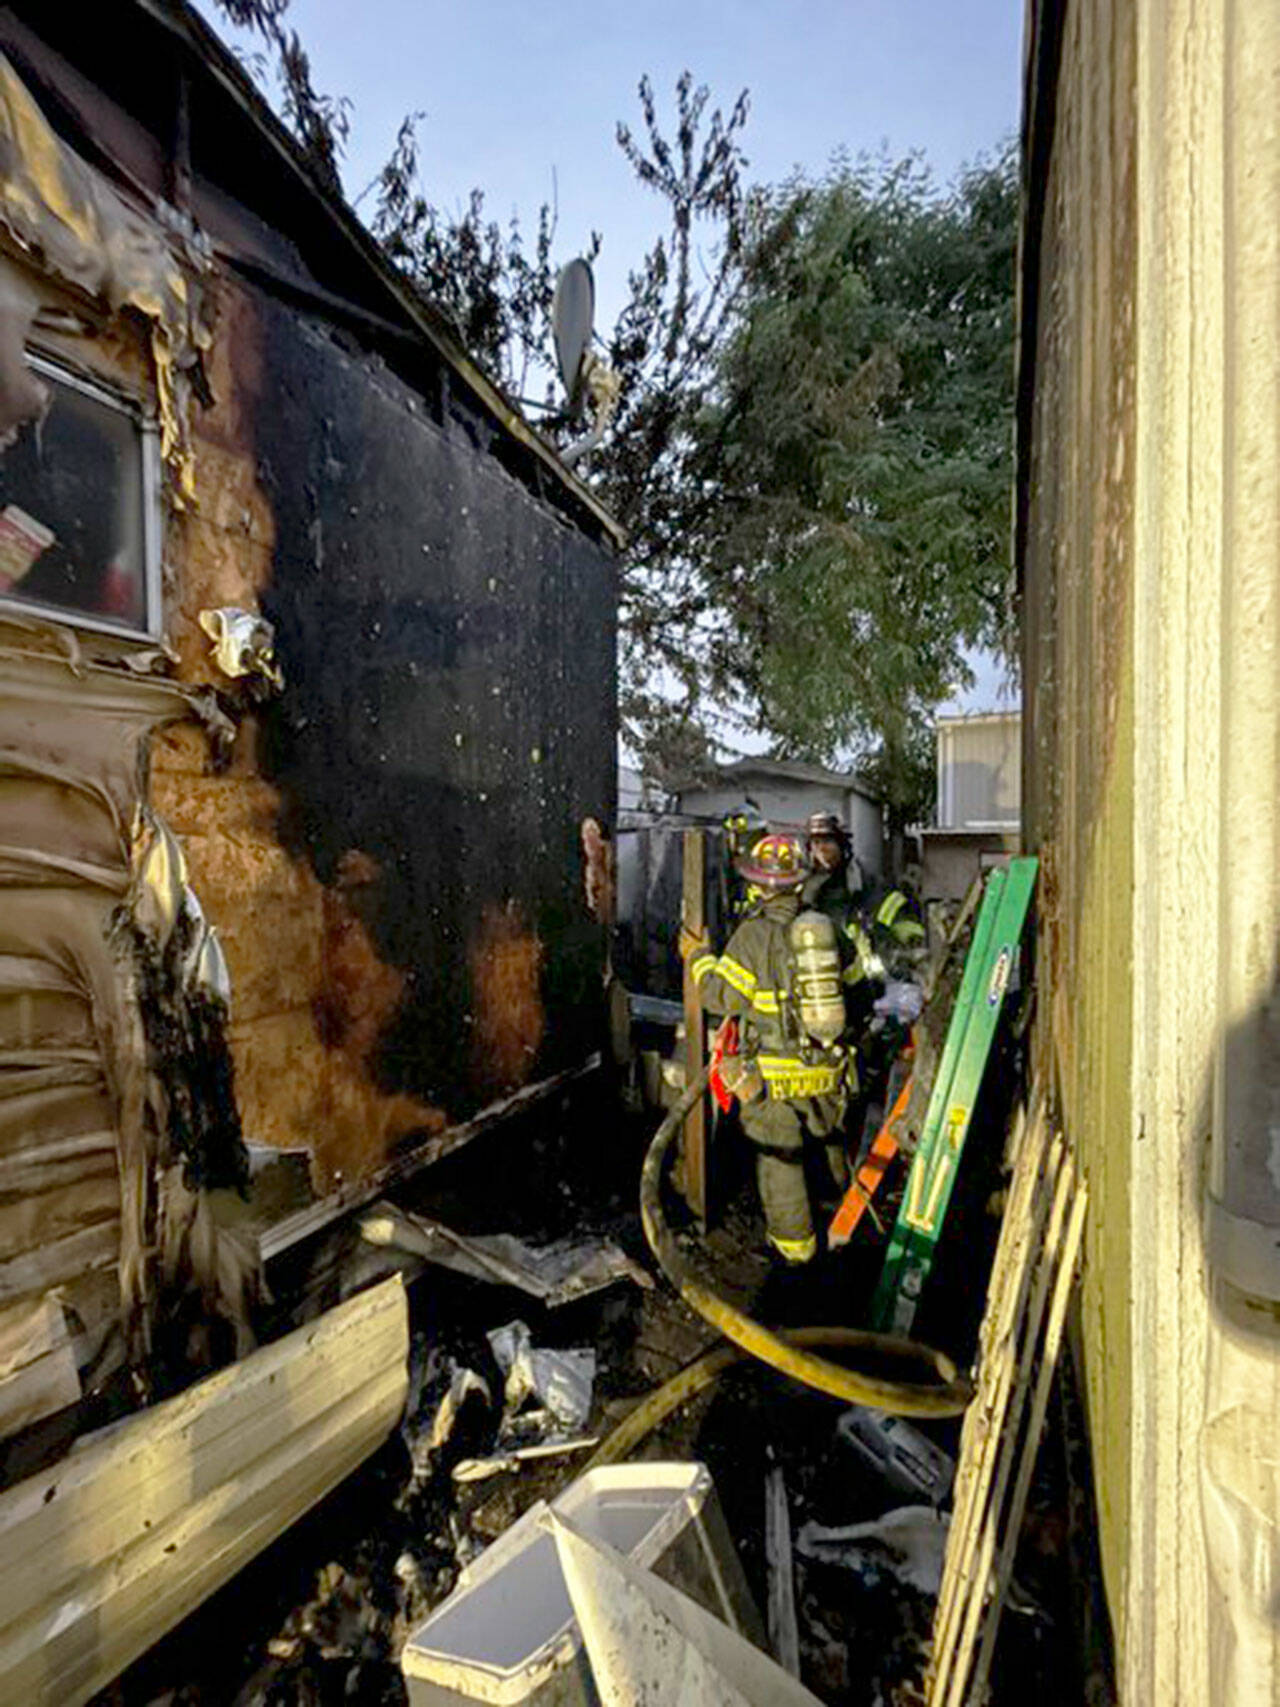 Puget Sound Fire responded to a mobile home park fire on Sept. 2 in the 800 block of Central Avenue South in Kent. COURTESY PHOTO, Puget Sound Fire